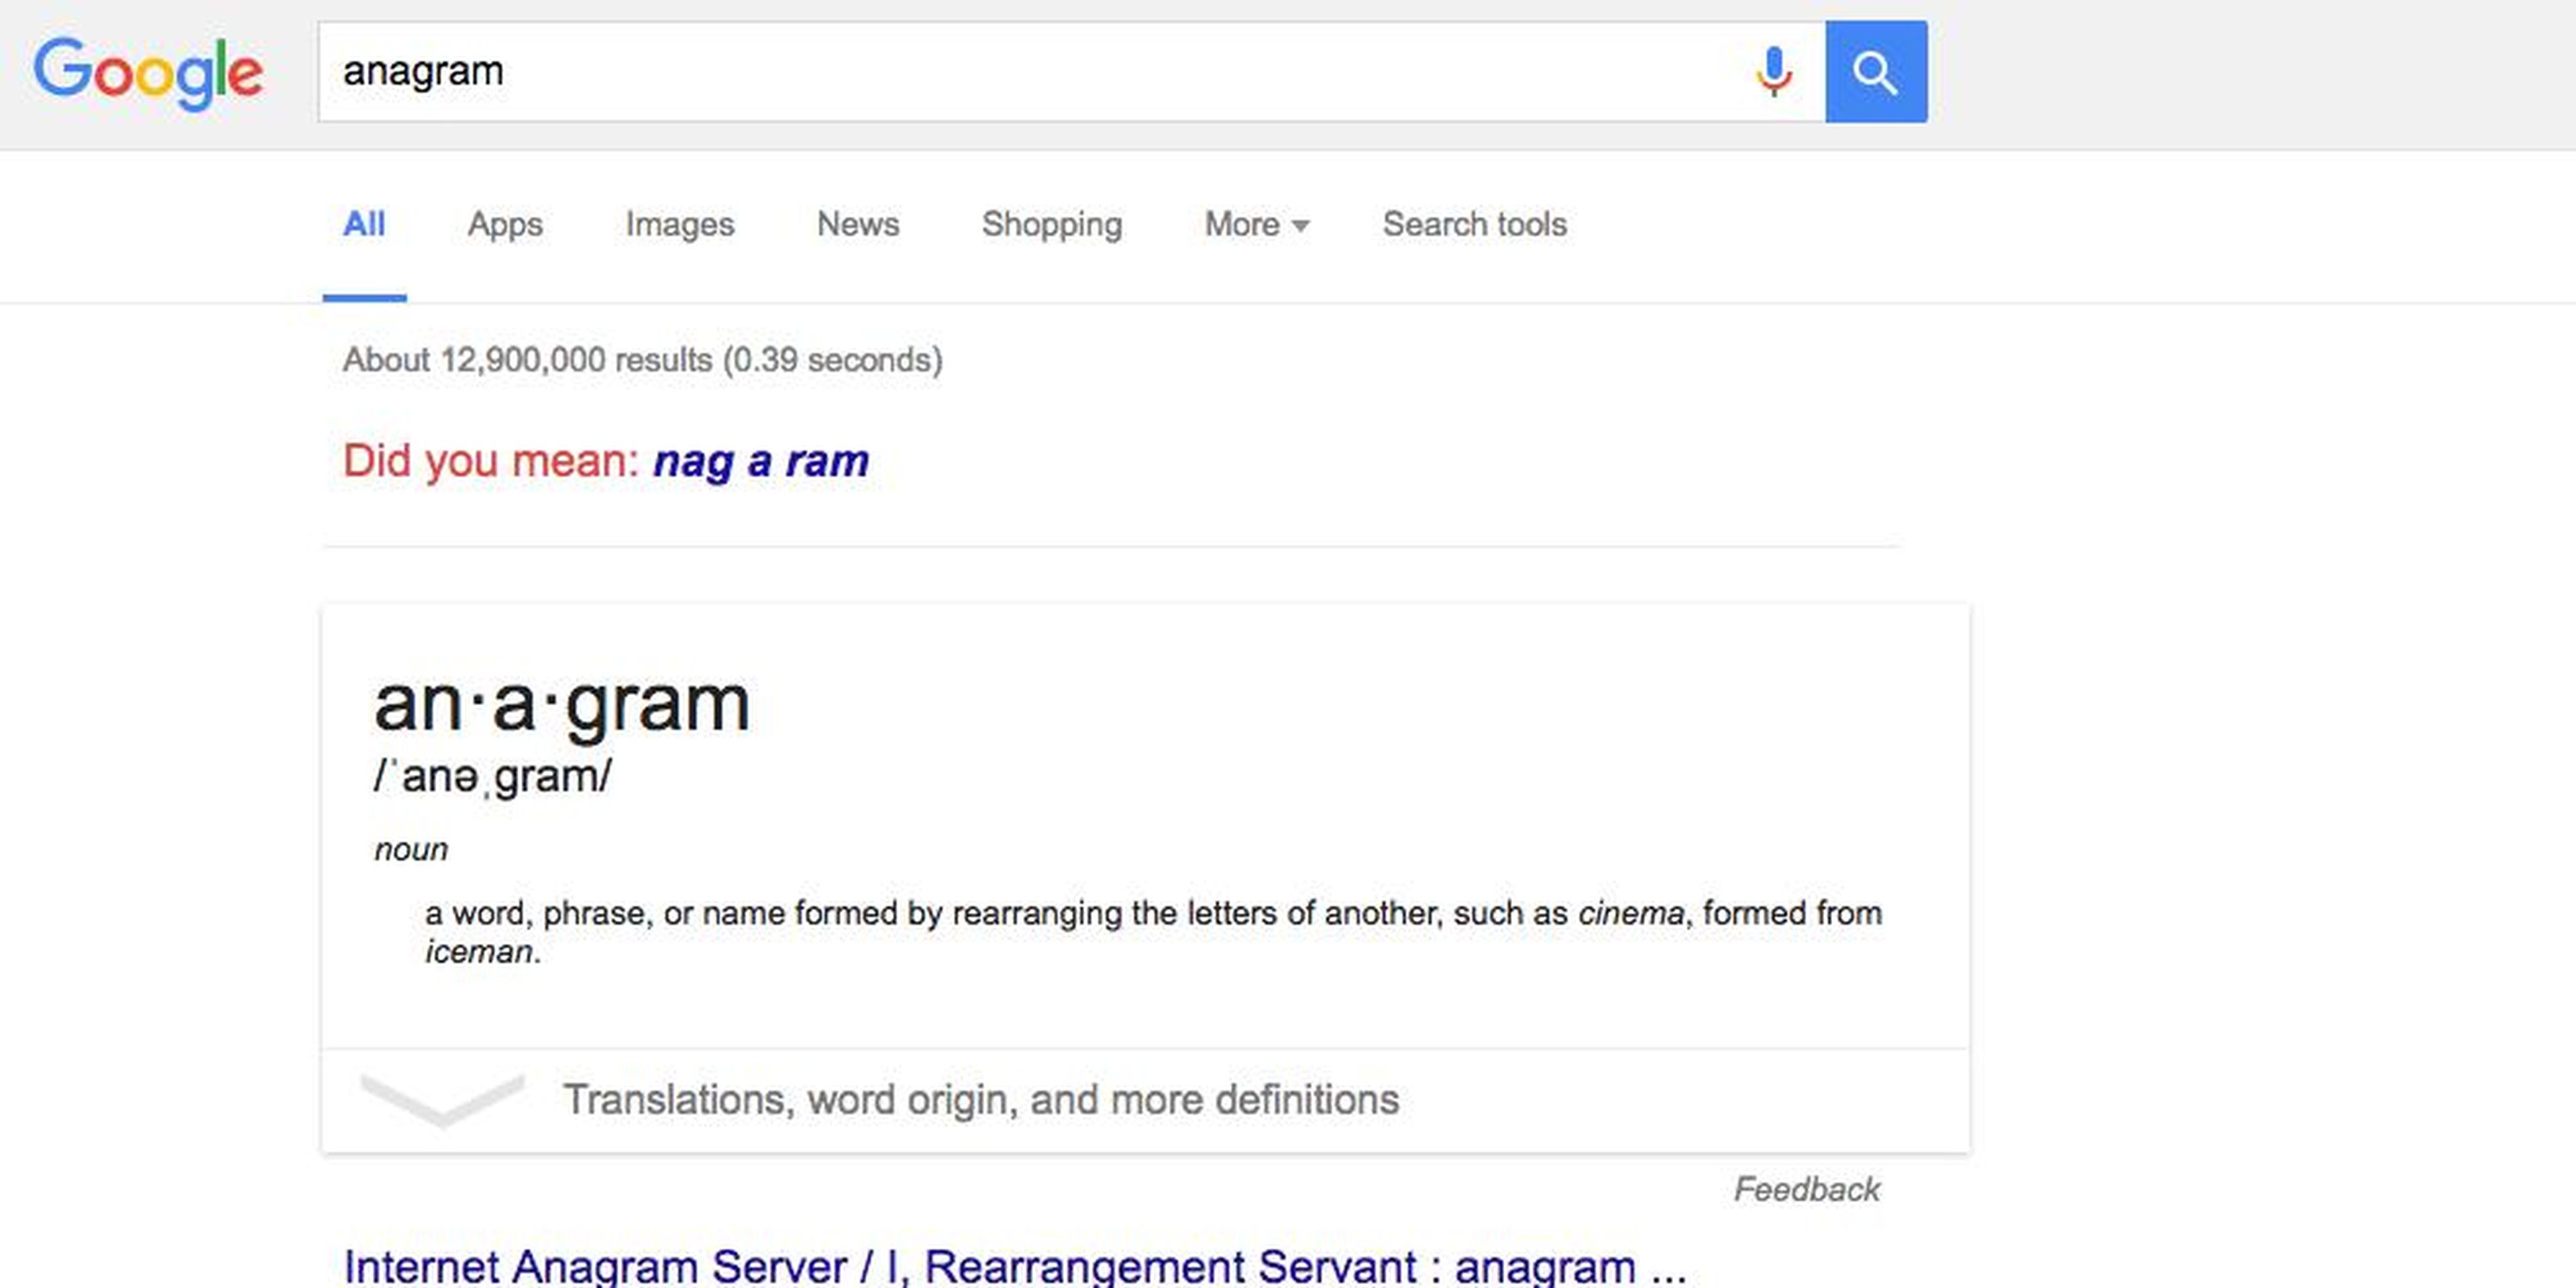 7. Searching “anagram” will ask if you meant “nag a ram." That, of course, is an anagram of "anagram."